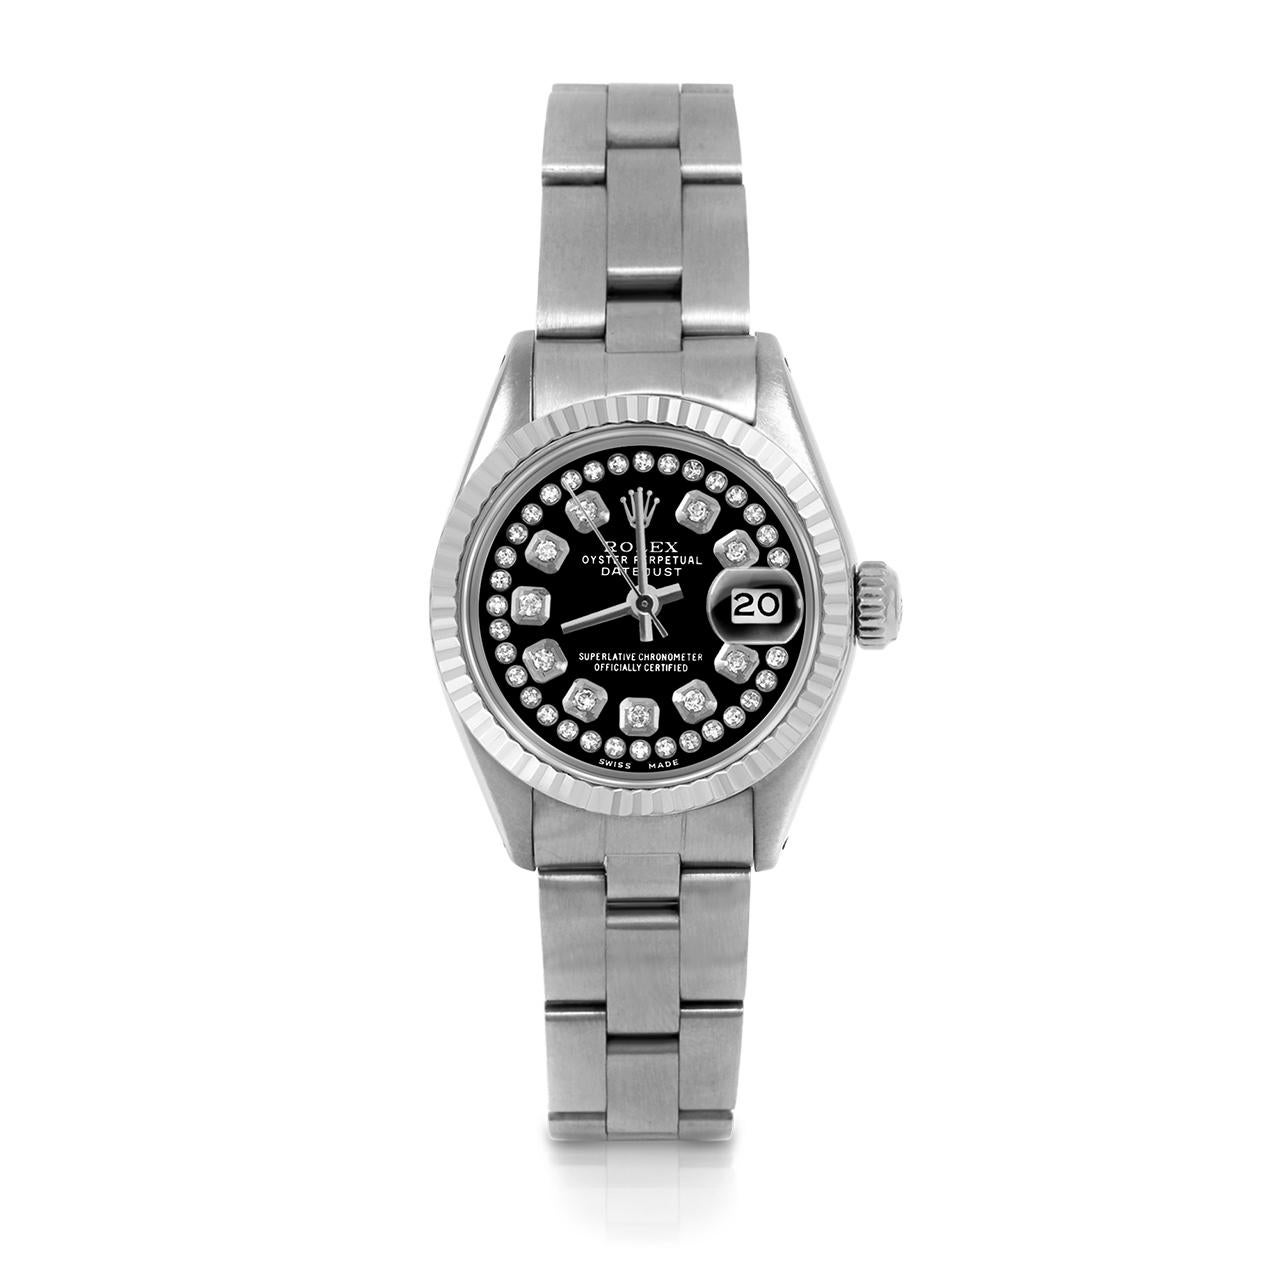 Pre-Owned Rolex 6917 Ladies 26mm Datejust Watch, Custom Black String Diamond Dial & Fluted Bezel on Rolex Stainless Steel Oyster Band.   

SKU 6917-SS-BLK-STRD-FLT-OYS


Brand/Model:        Rolex Datejust
Model Number:        6917
Style:       